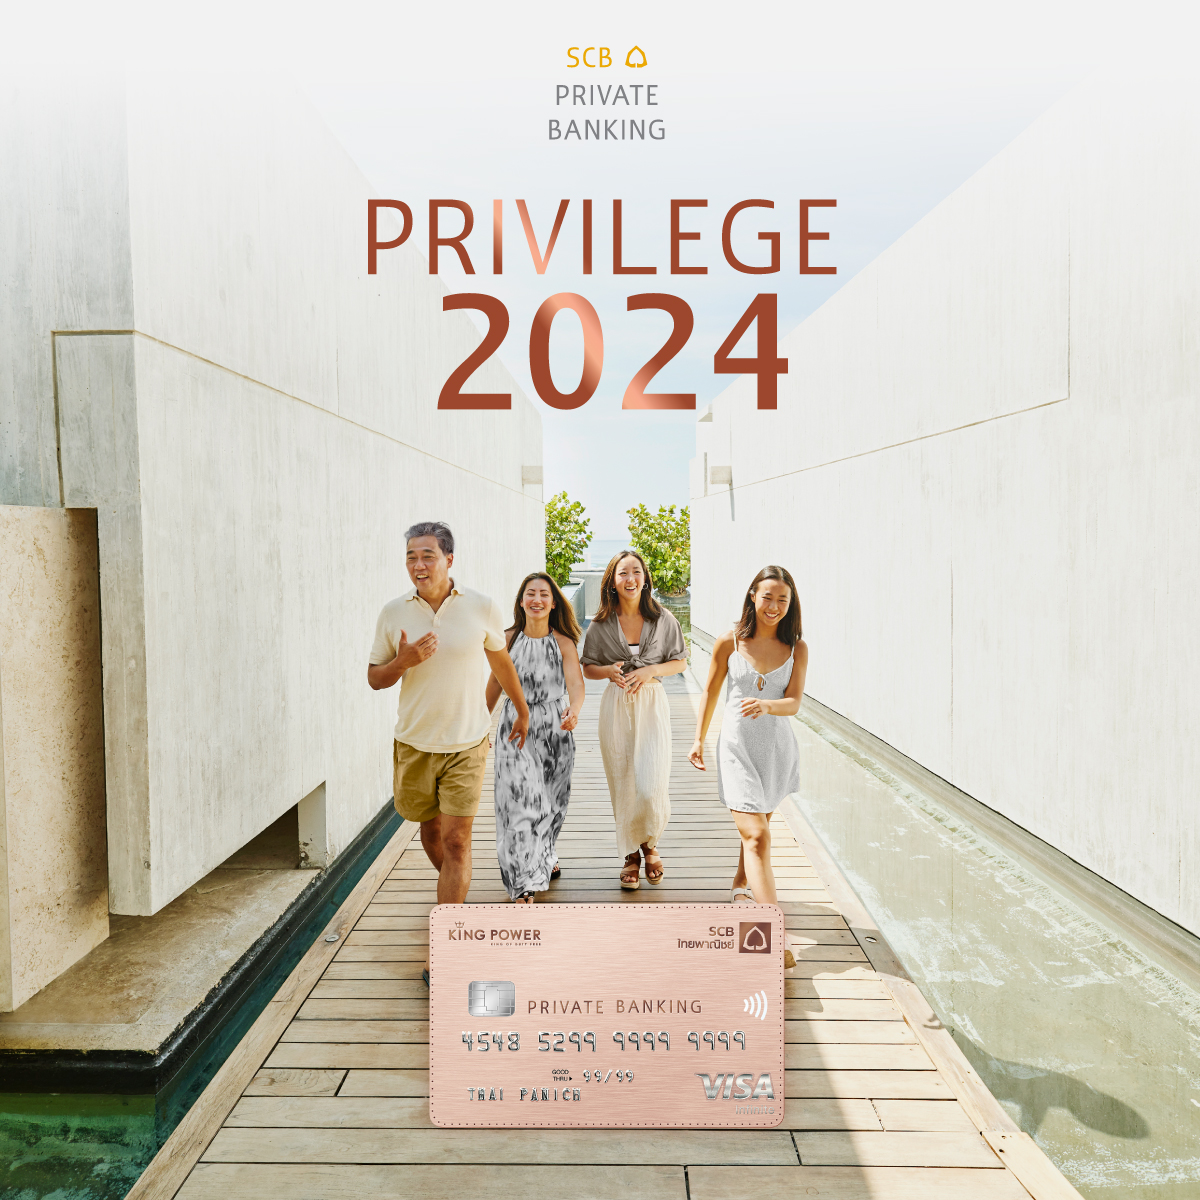 New SCB PRIVATE BANKING Privileges 2024 (ฉบับภาษาไทย)